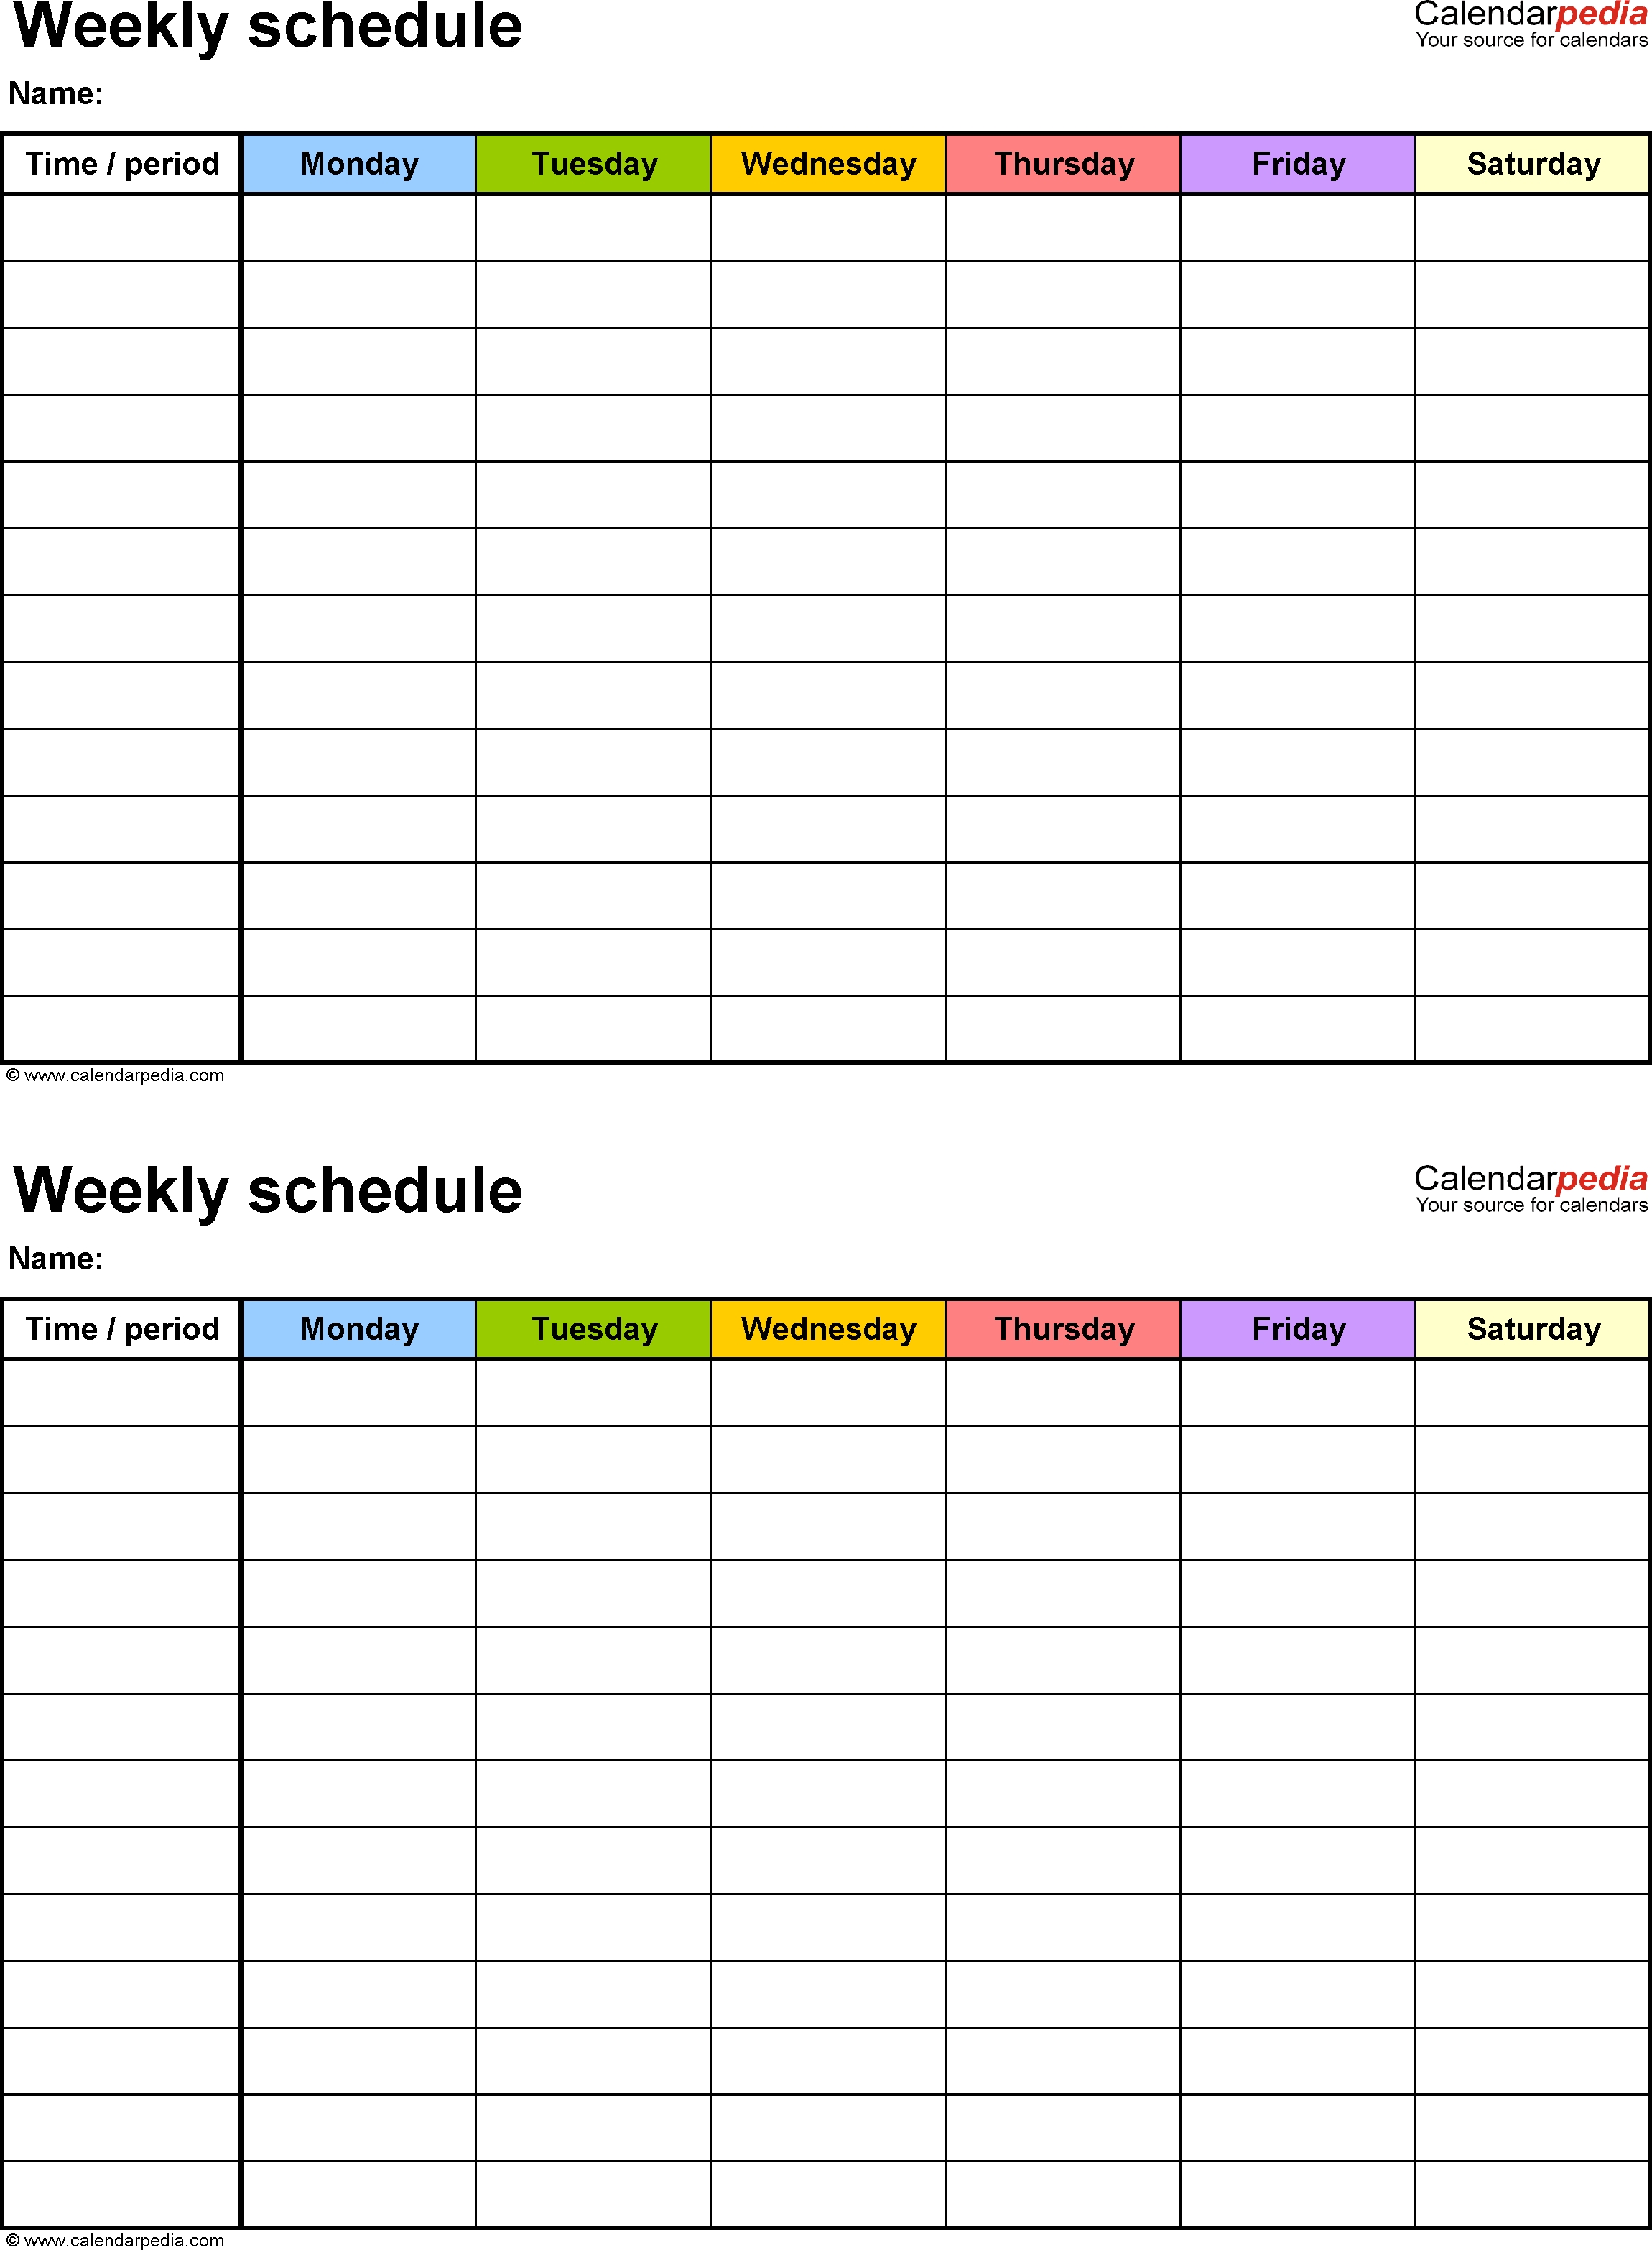 Free Weekly Schedule Templates For Word - 18 Templates regarding 5 Day Weekly Schedule Template